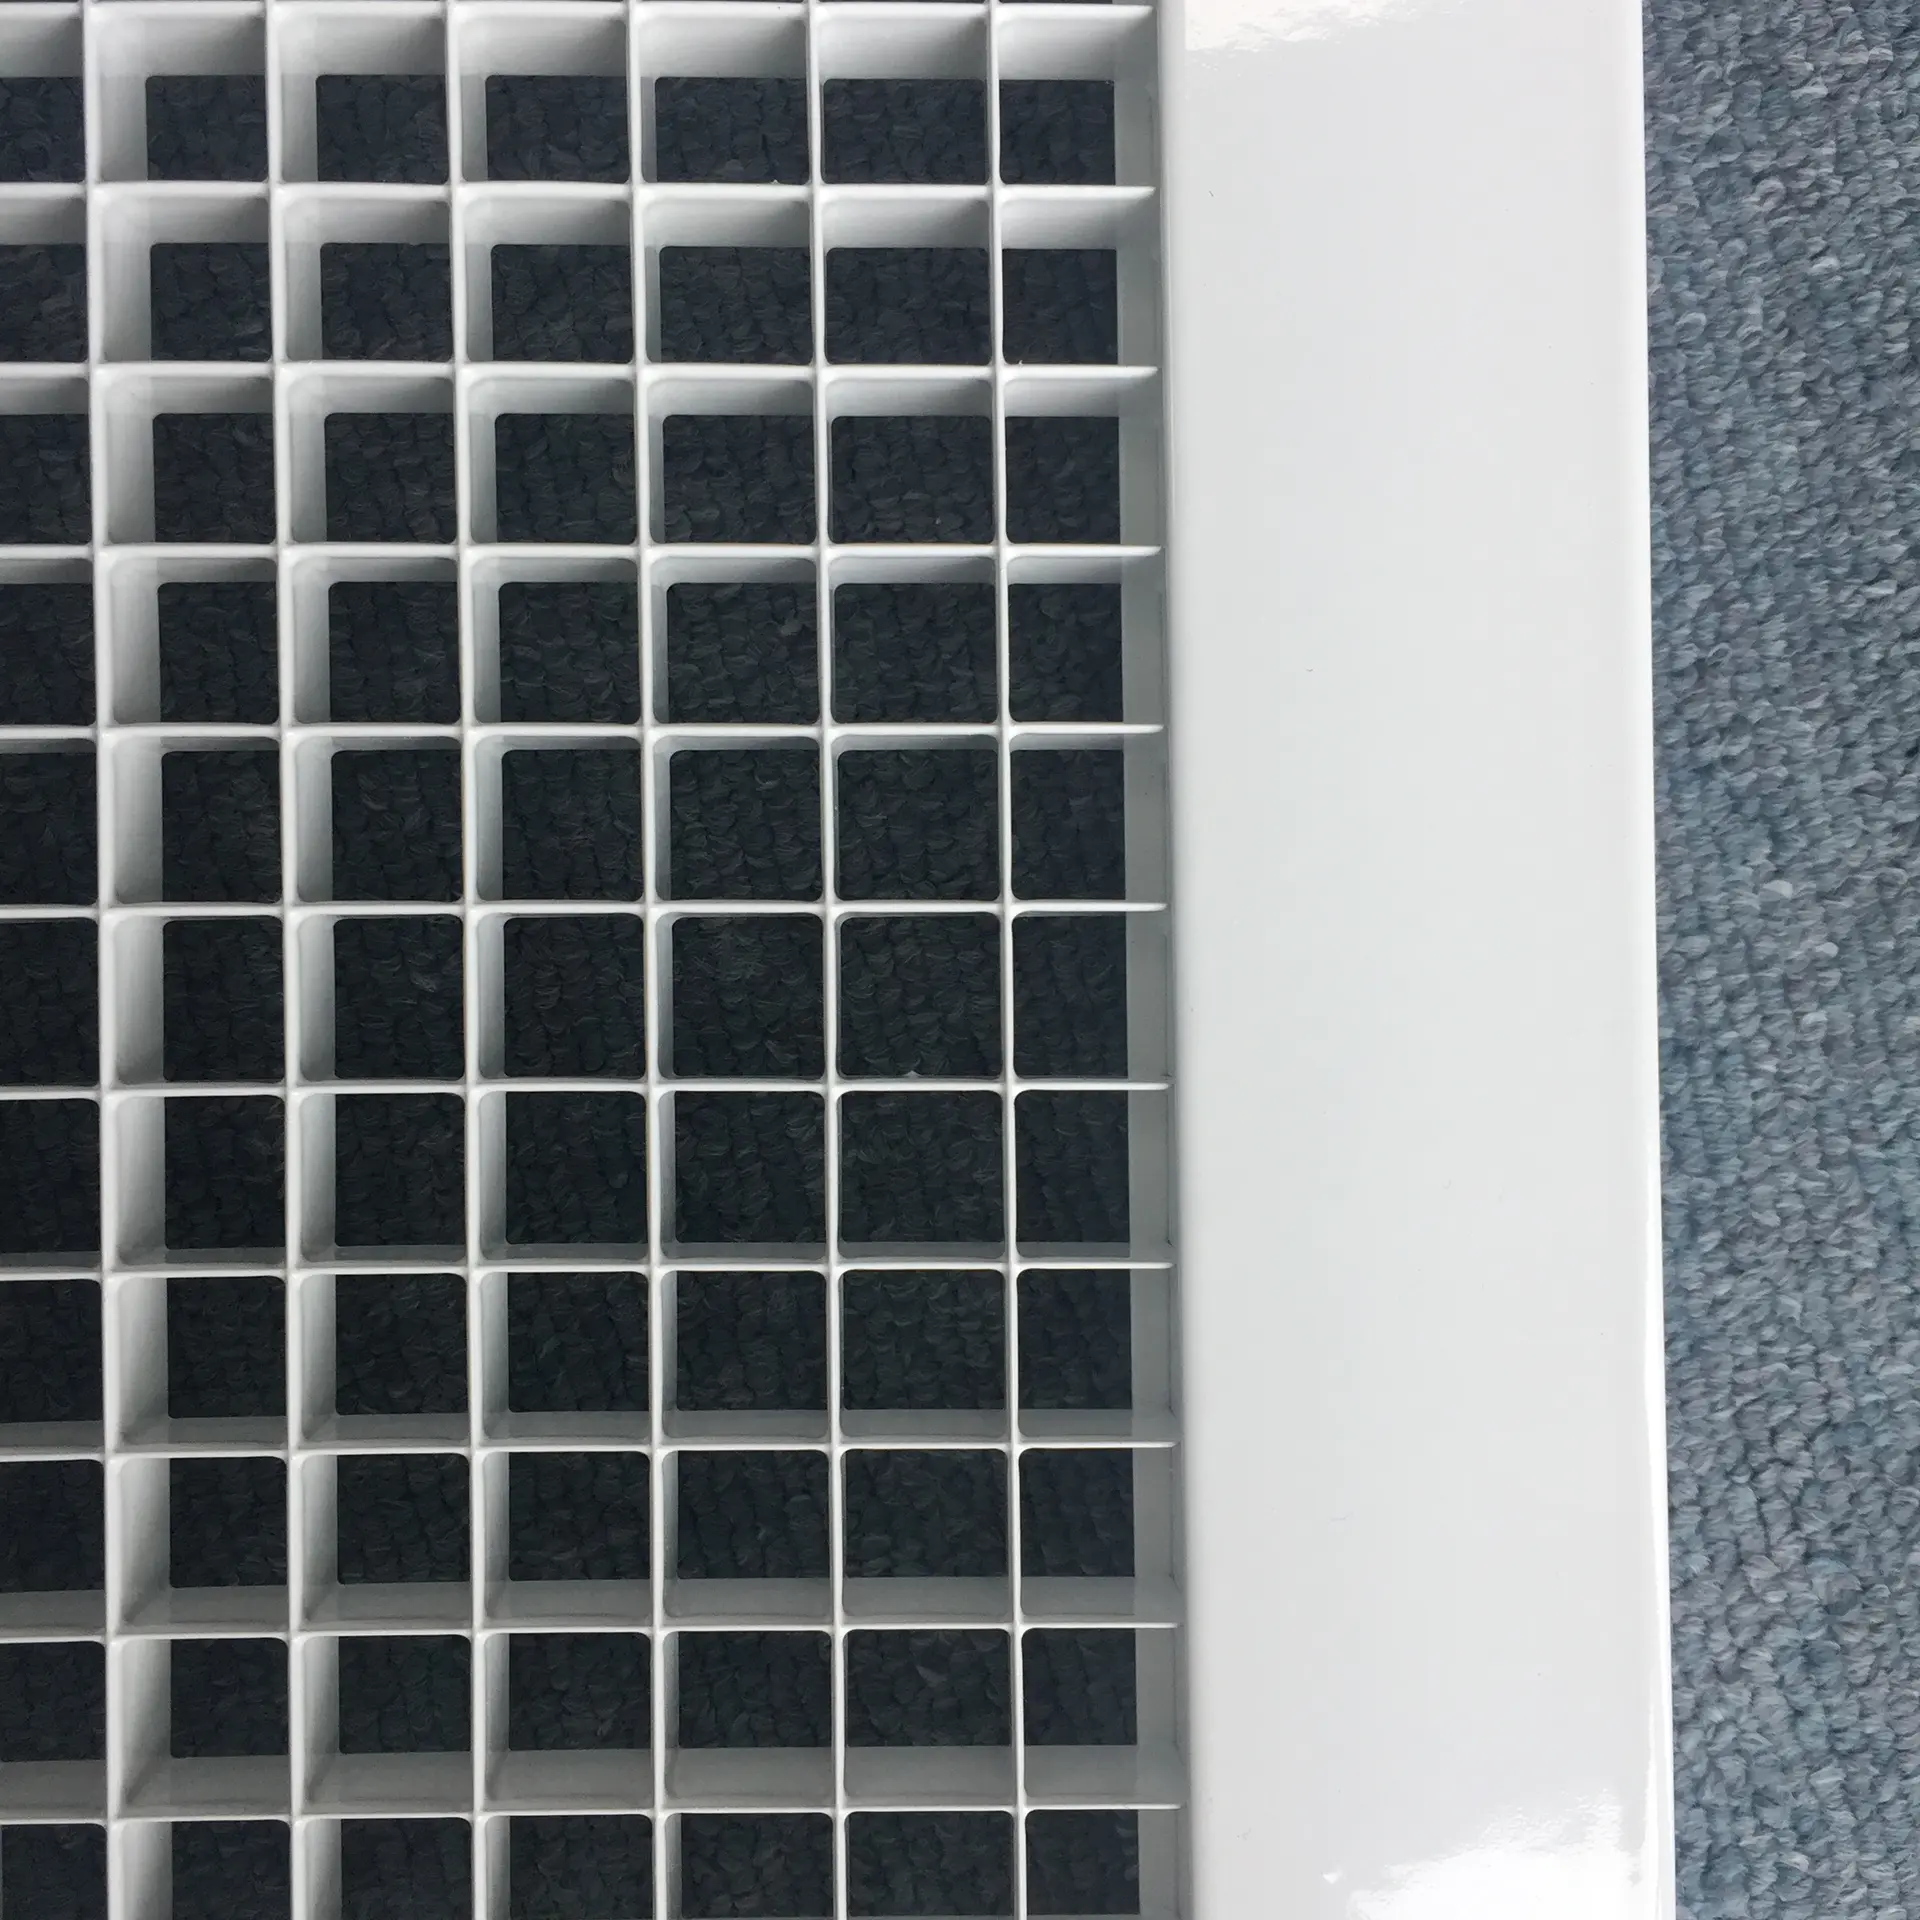 HVAC System Rigid Duct Mounted Exhaust Air 90 Degree Egg Crate Air Grille for Ventilation